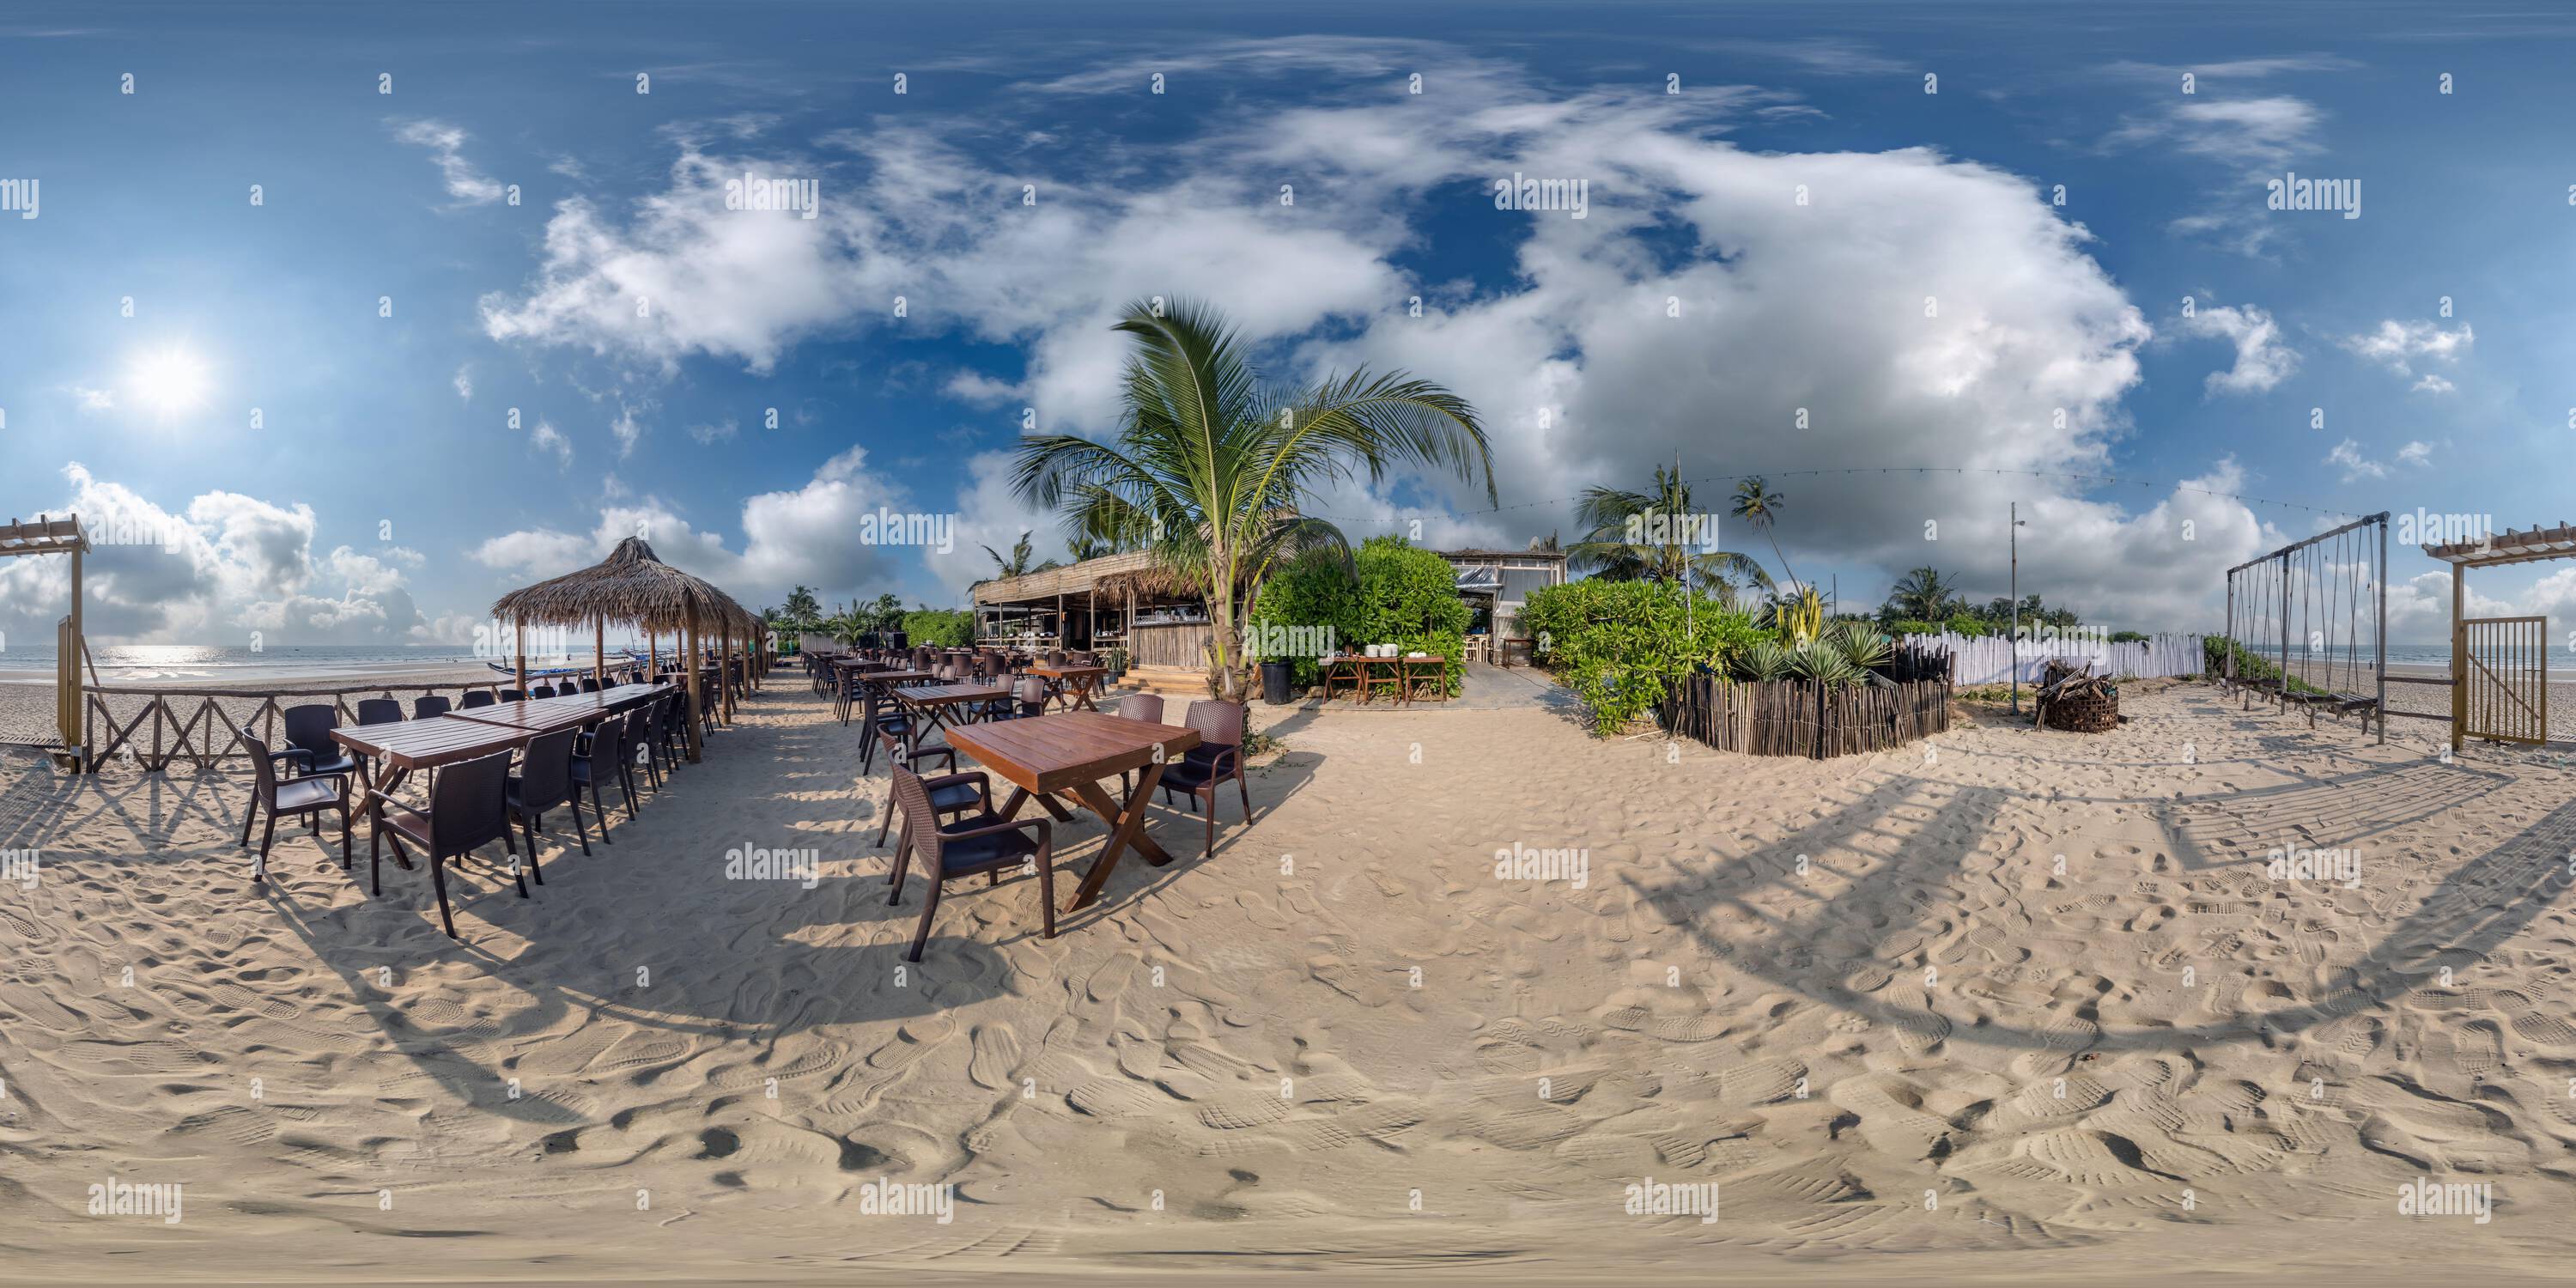 360 degree panoramic view of 360 hdri panorama with coconut trees on ocean coast near tropical shack or open cafe on beach with swing in equirectangular spherical seamless project